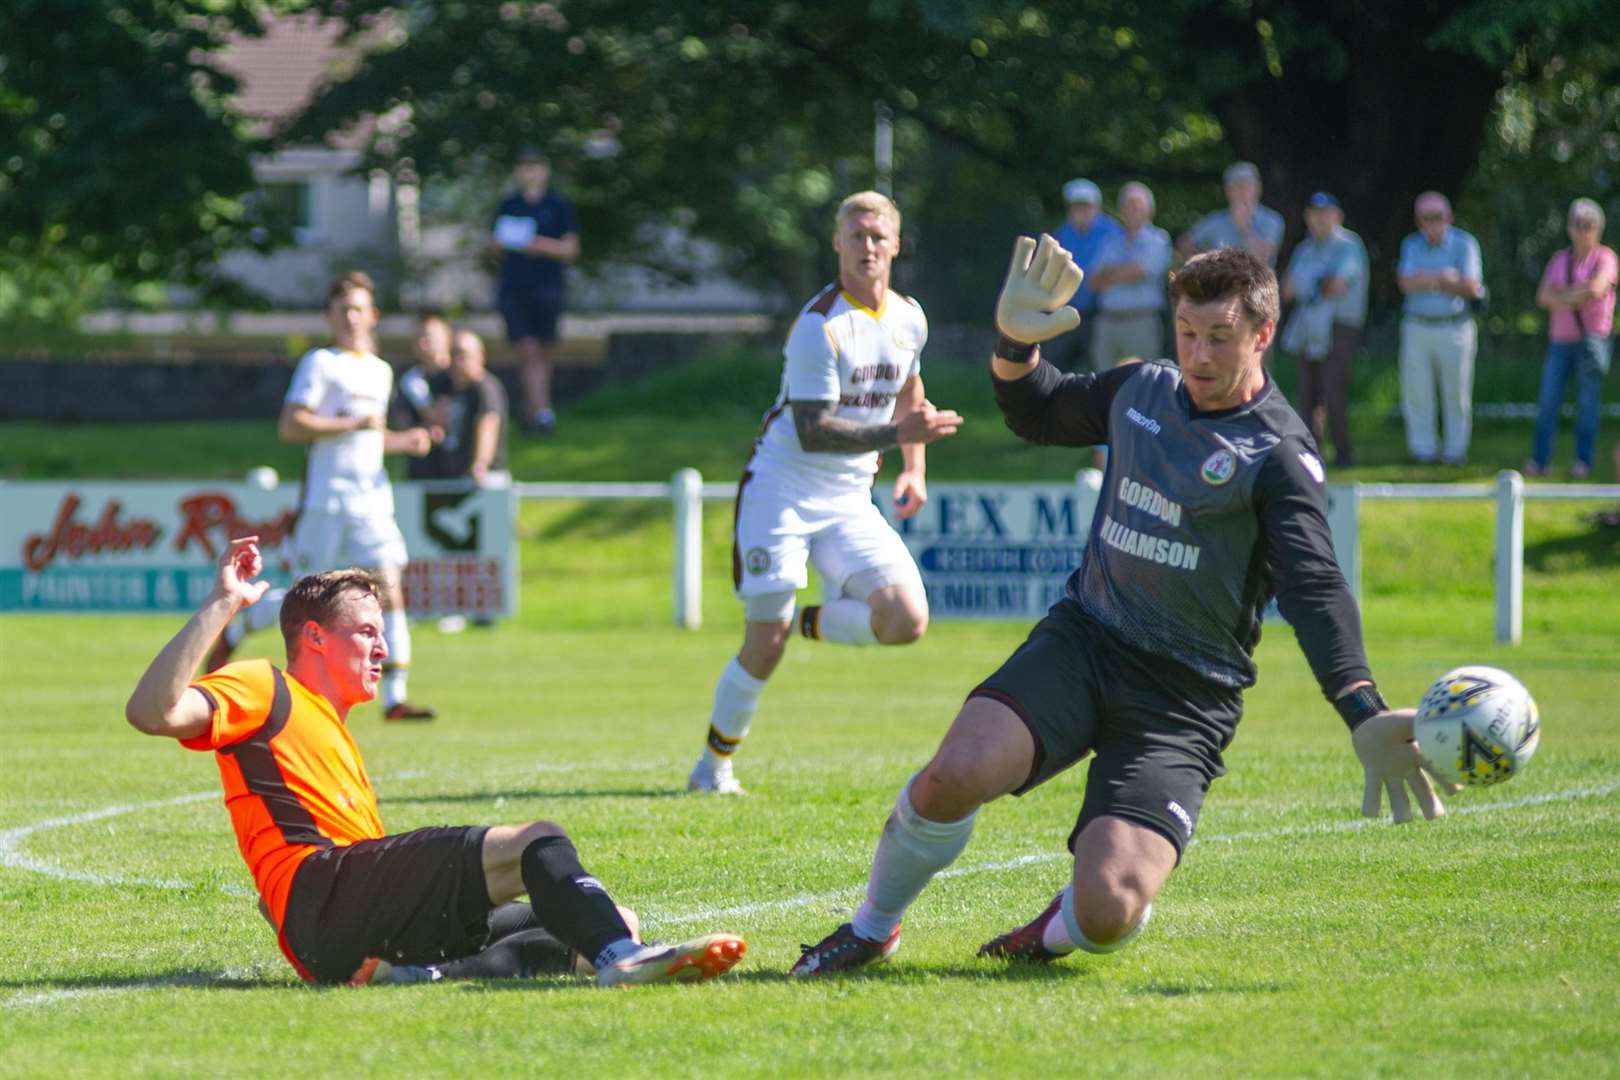 Rothes forward Steven Anderson forces a good save from Forres Mechanics' keeper Stuart Knight as Forres lose 4-1 at Rothes. Picture: Daniel Forsyth